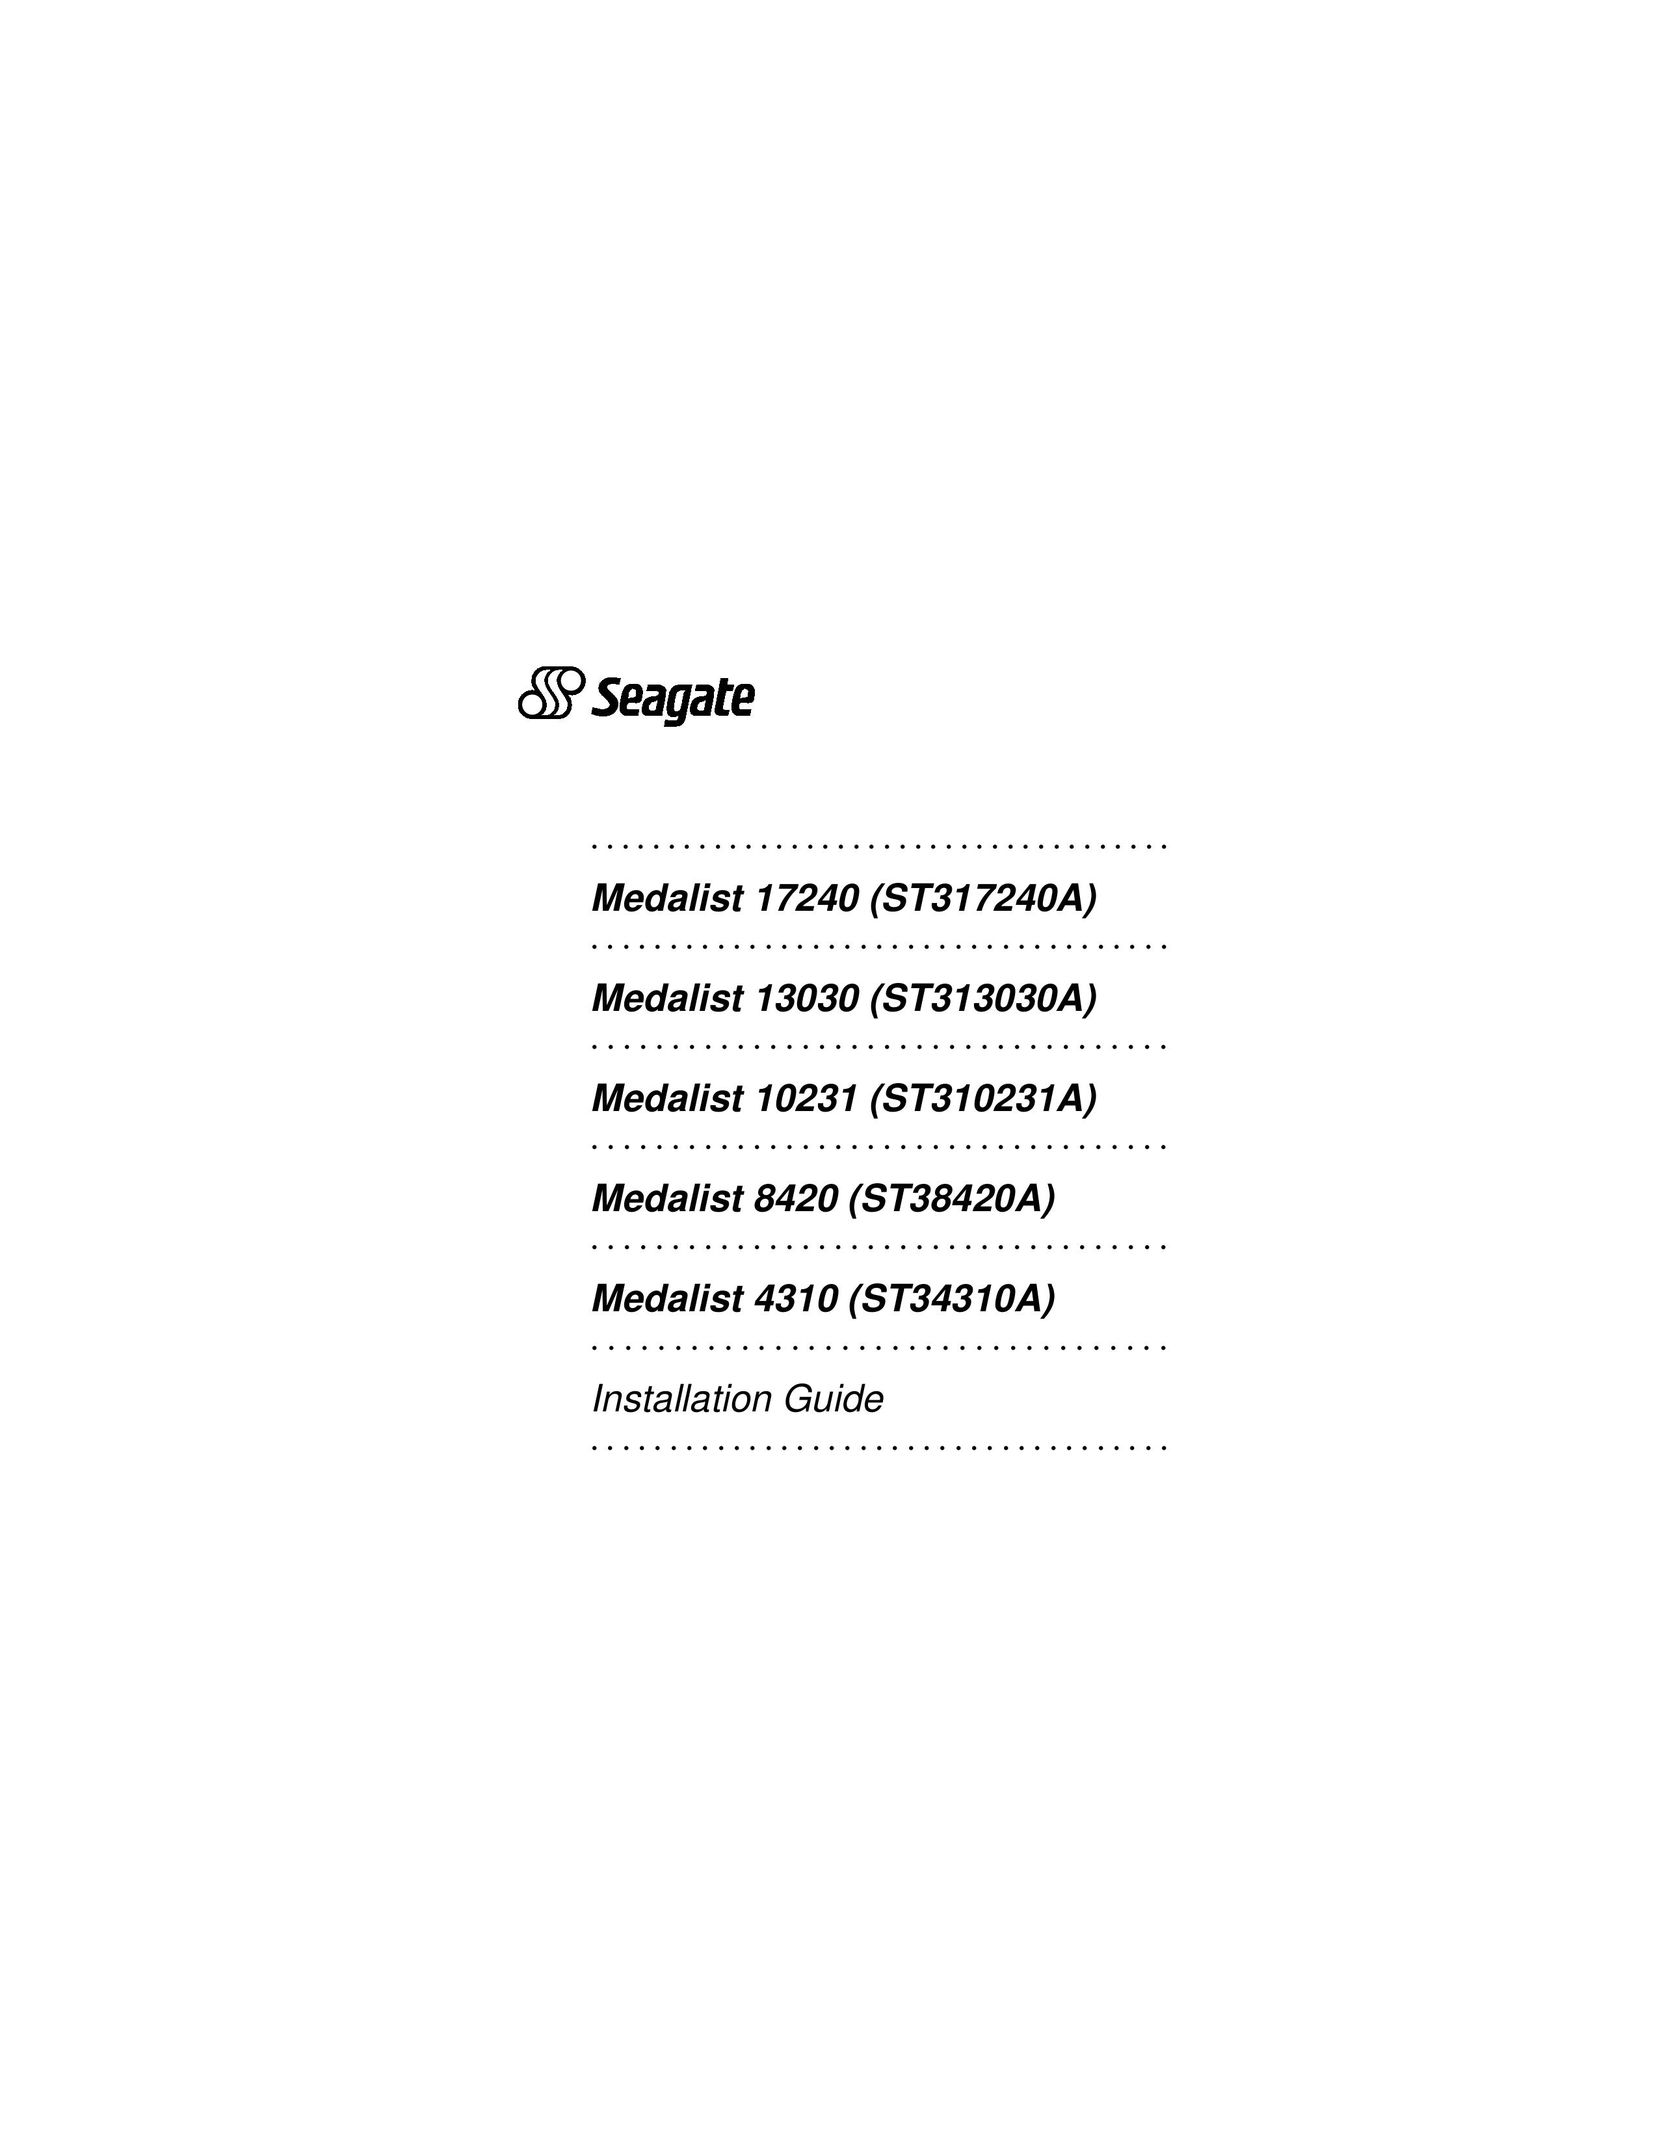 Seagate ST317240A Two-Way Radio User Manual